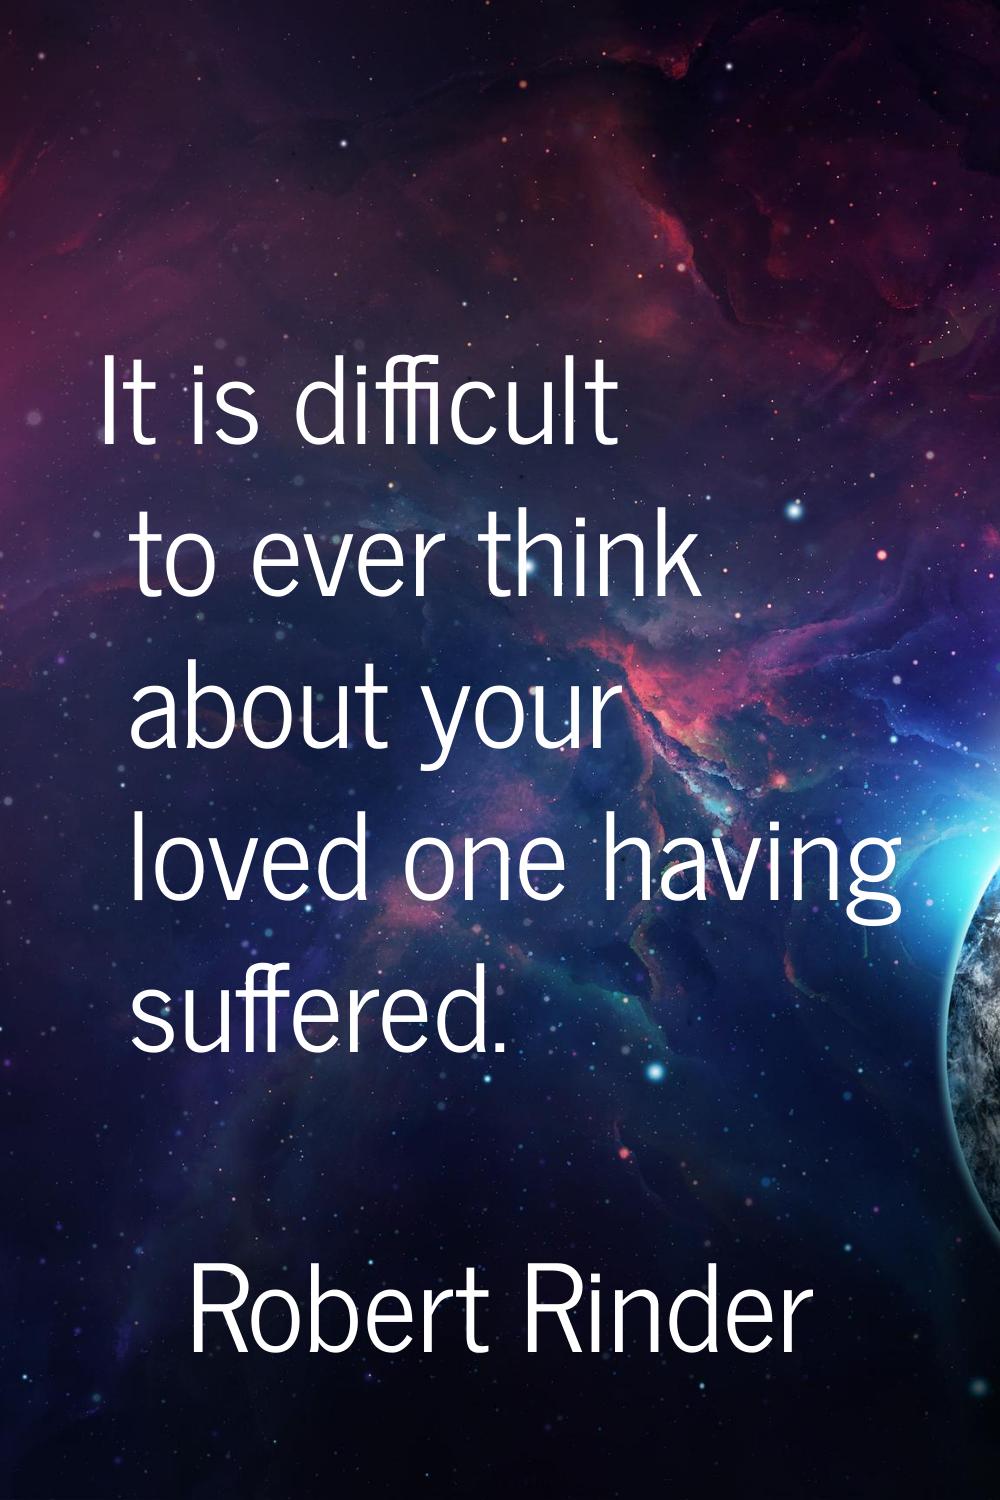 It is difficult to ever think about your loved one having suffered.